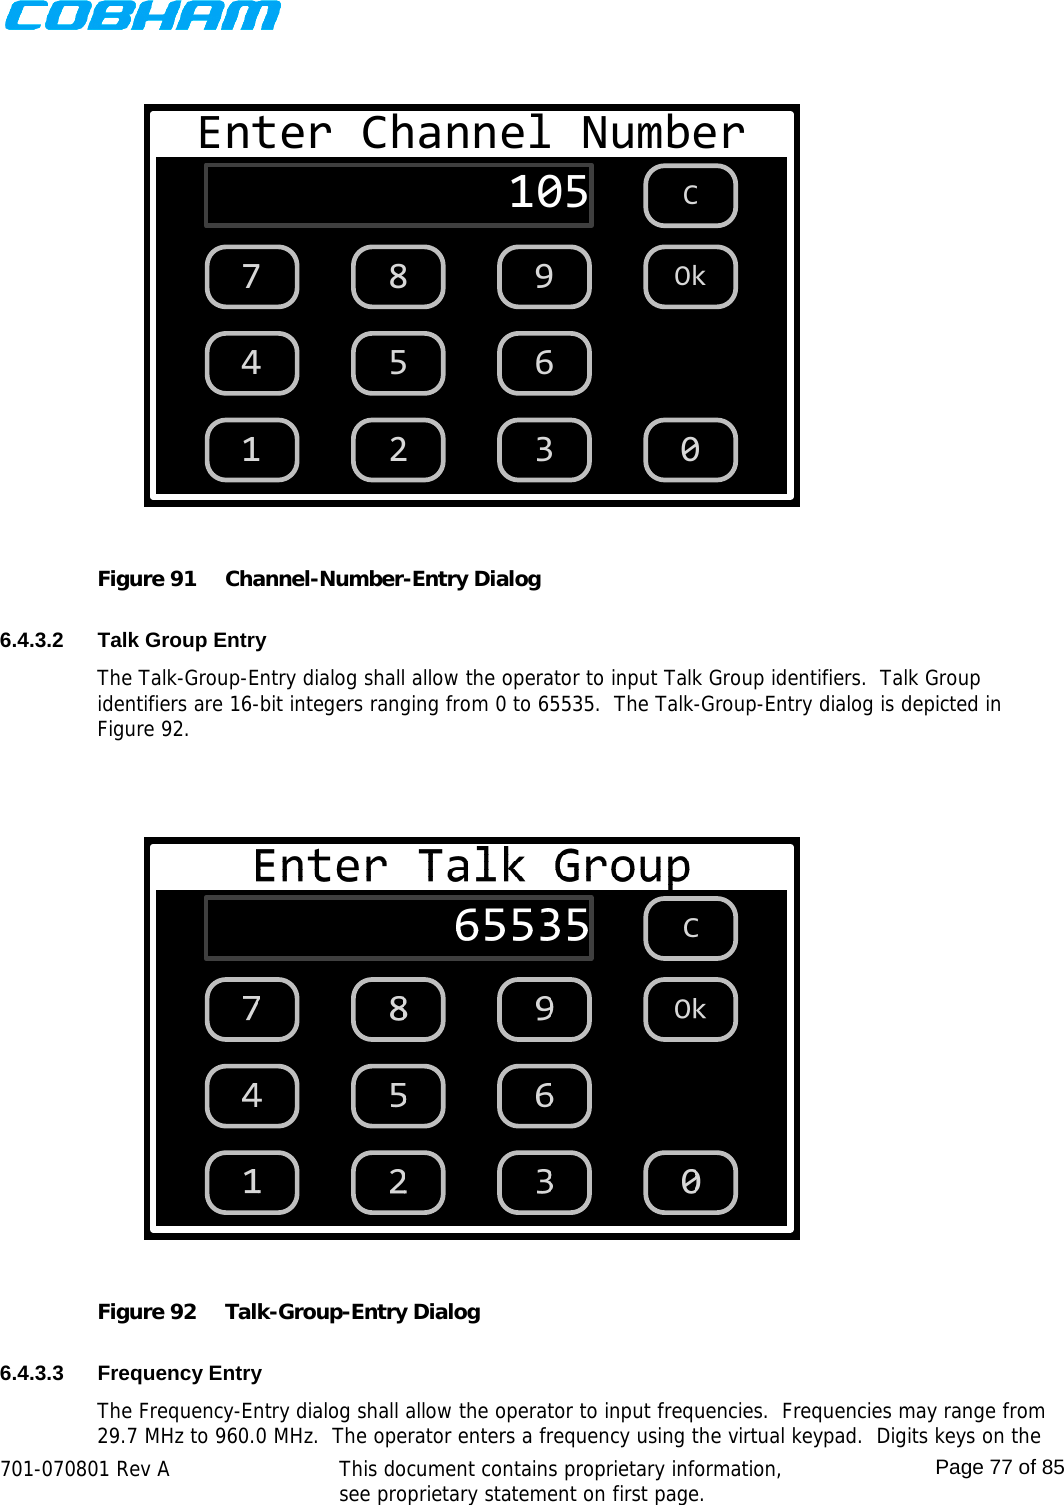    701-070801 Rev A   This document contains proprietary information, see proprietary statement on first page.  Page 77 of 85  Enter Channel Number1051 2 3654987C0Ok Figure 91  Channel-Number-Entry Dialog  6.4.3.2 Talk Group Entry The Talk-Group-Entry dialog shall allow the operator to input Talk Group identifiers.  Talk Group identifiers are 16-bit integers ranging from 0 to 65535.  The Talk-Group-Entry dialog is depicted in Figure 92.   Figure 92  Talk-Group-Entry Dialog  6.4.3.3 Frequency Entry The Frequency-Entry dialog shall allow the operator to input frequencies.  Frequencies may range from 29.7 MHz to 960.0 MHz.  The operator enters a frequency using the virtual keypad.  Digits keys on the 